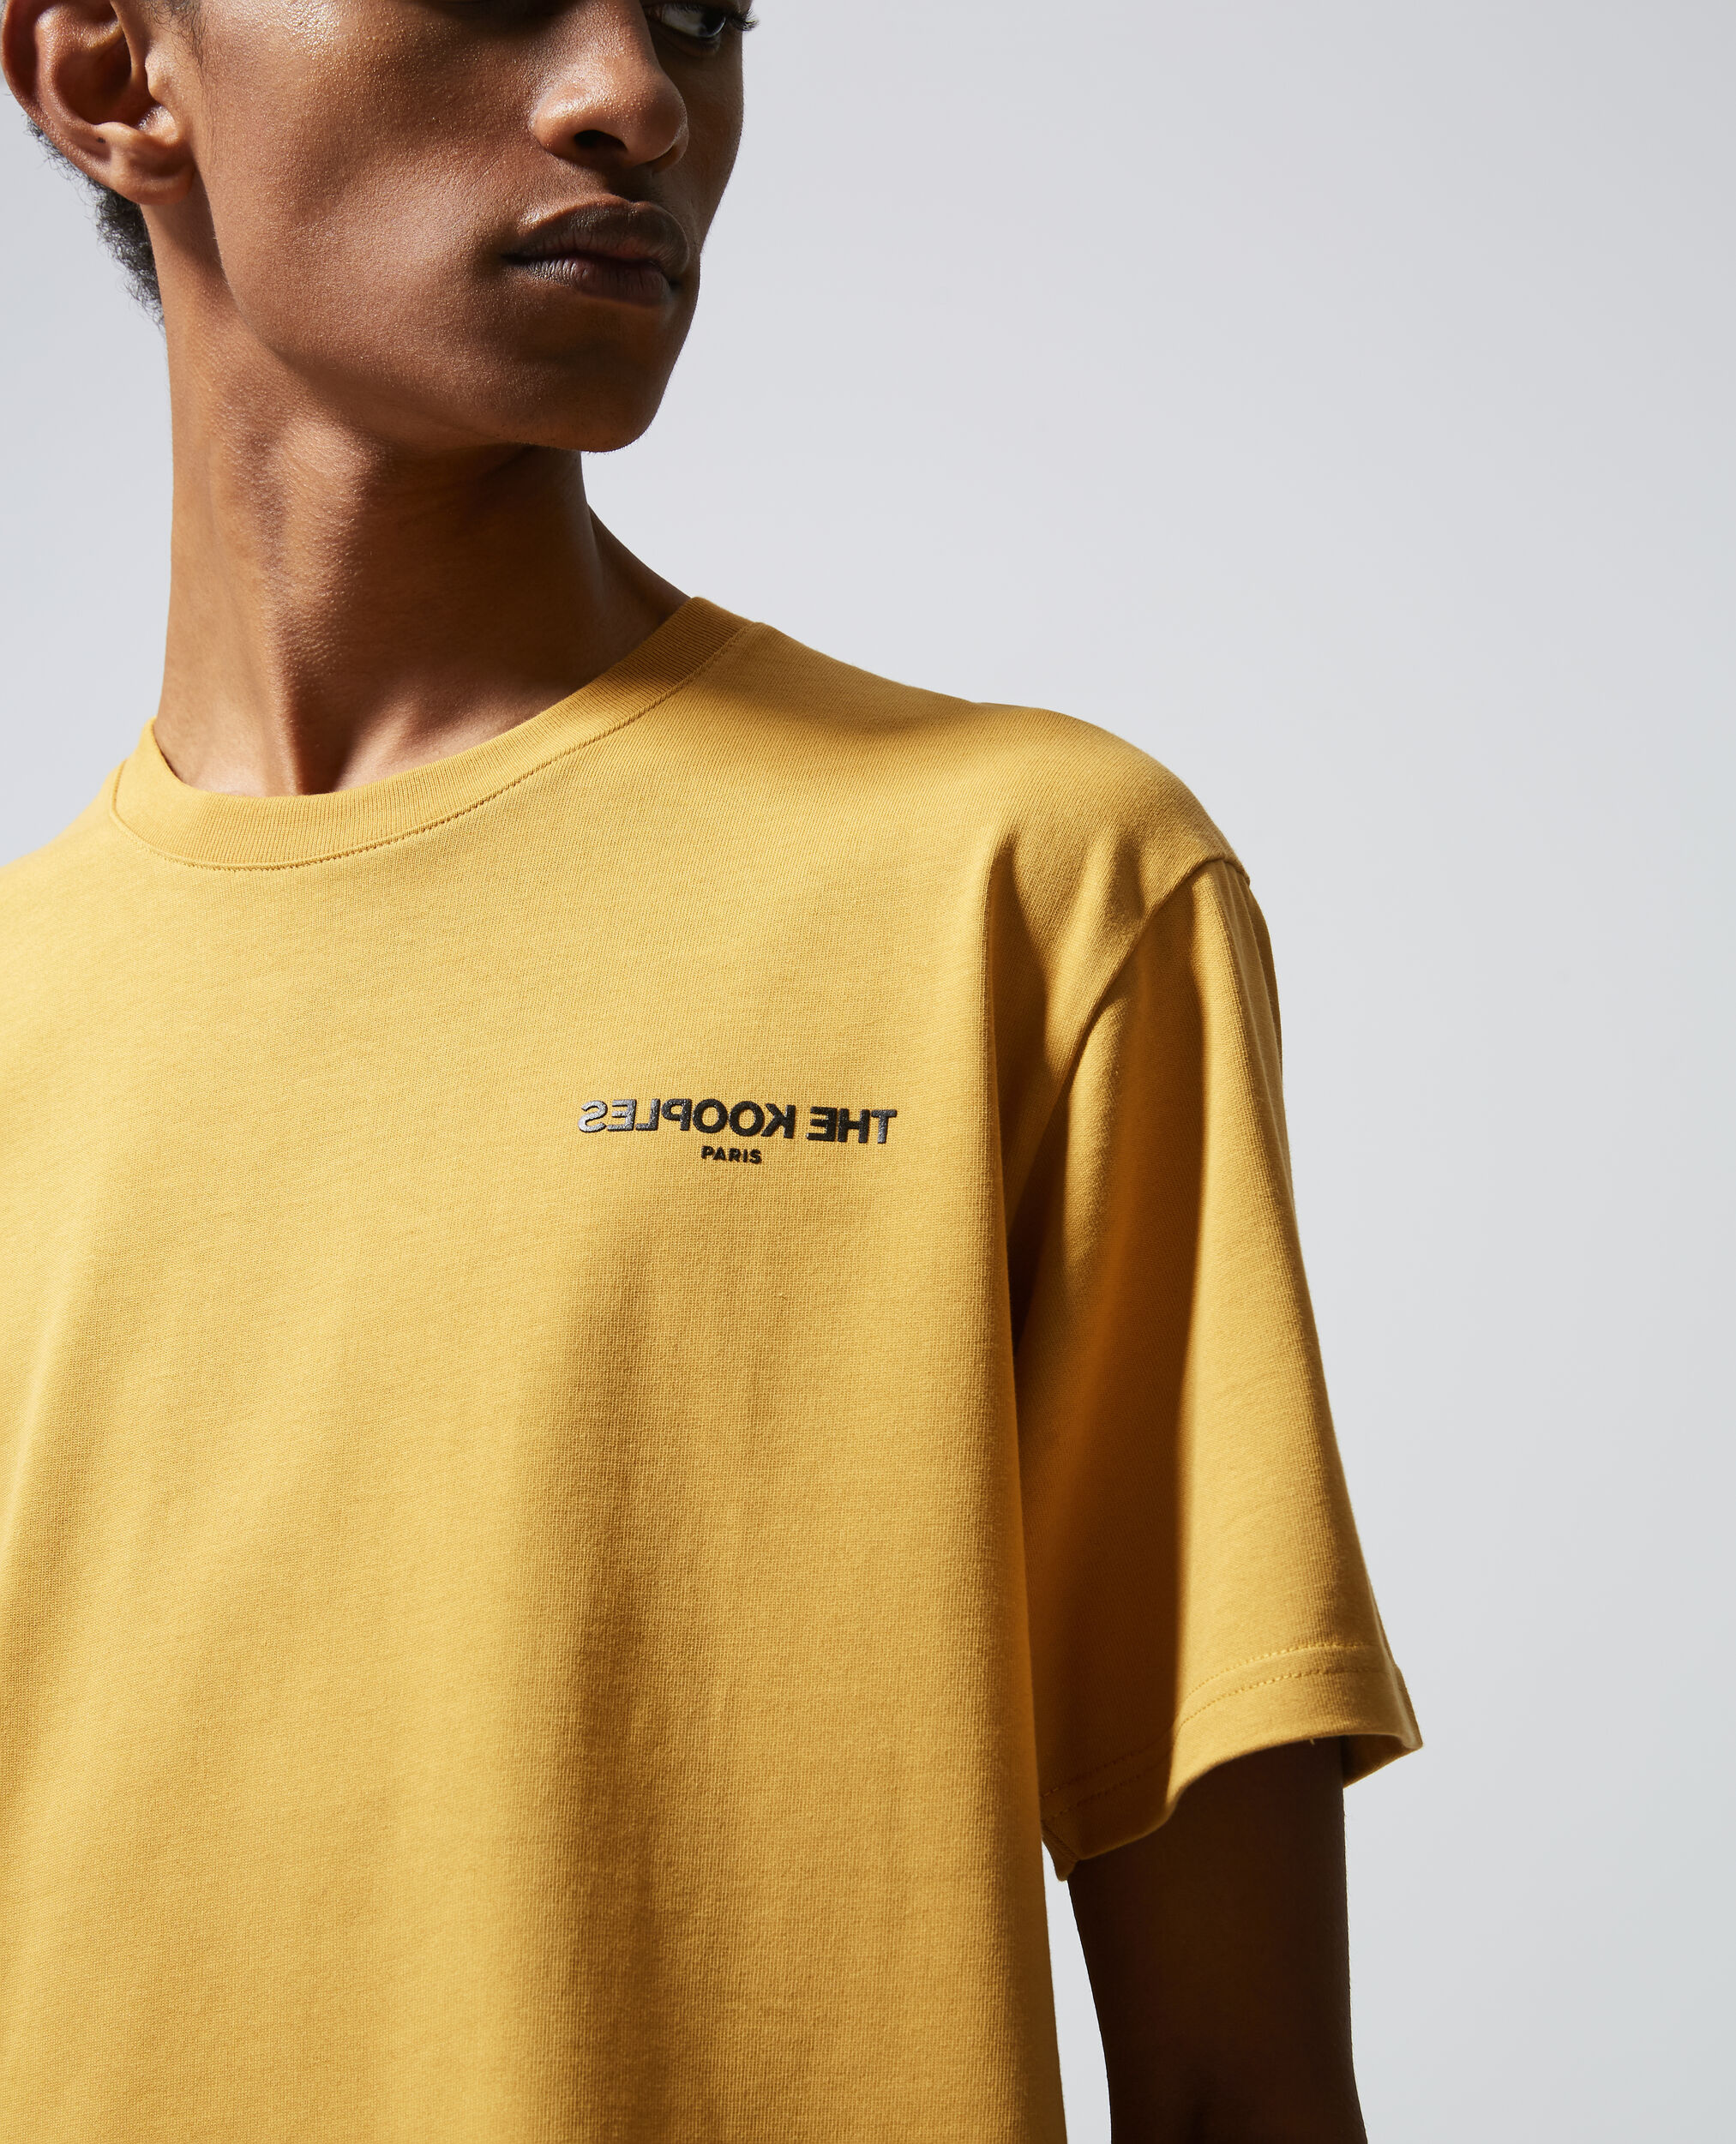 T-shirt coton logo The Kooples moutarde, MUSTARD, hi-res image number null